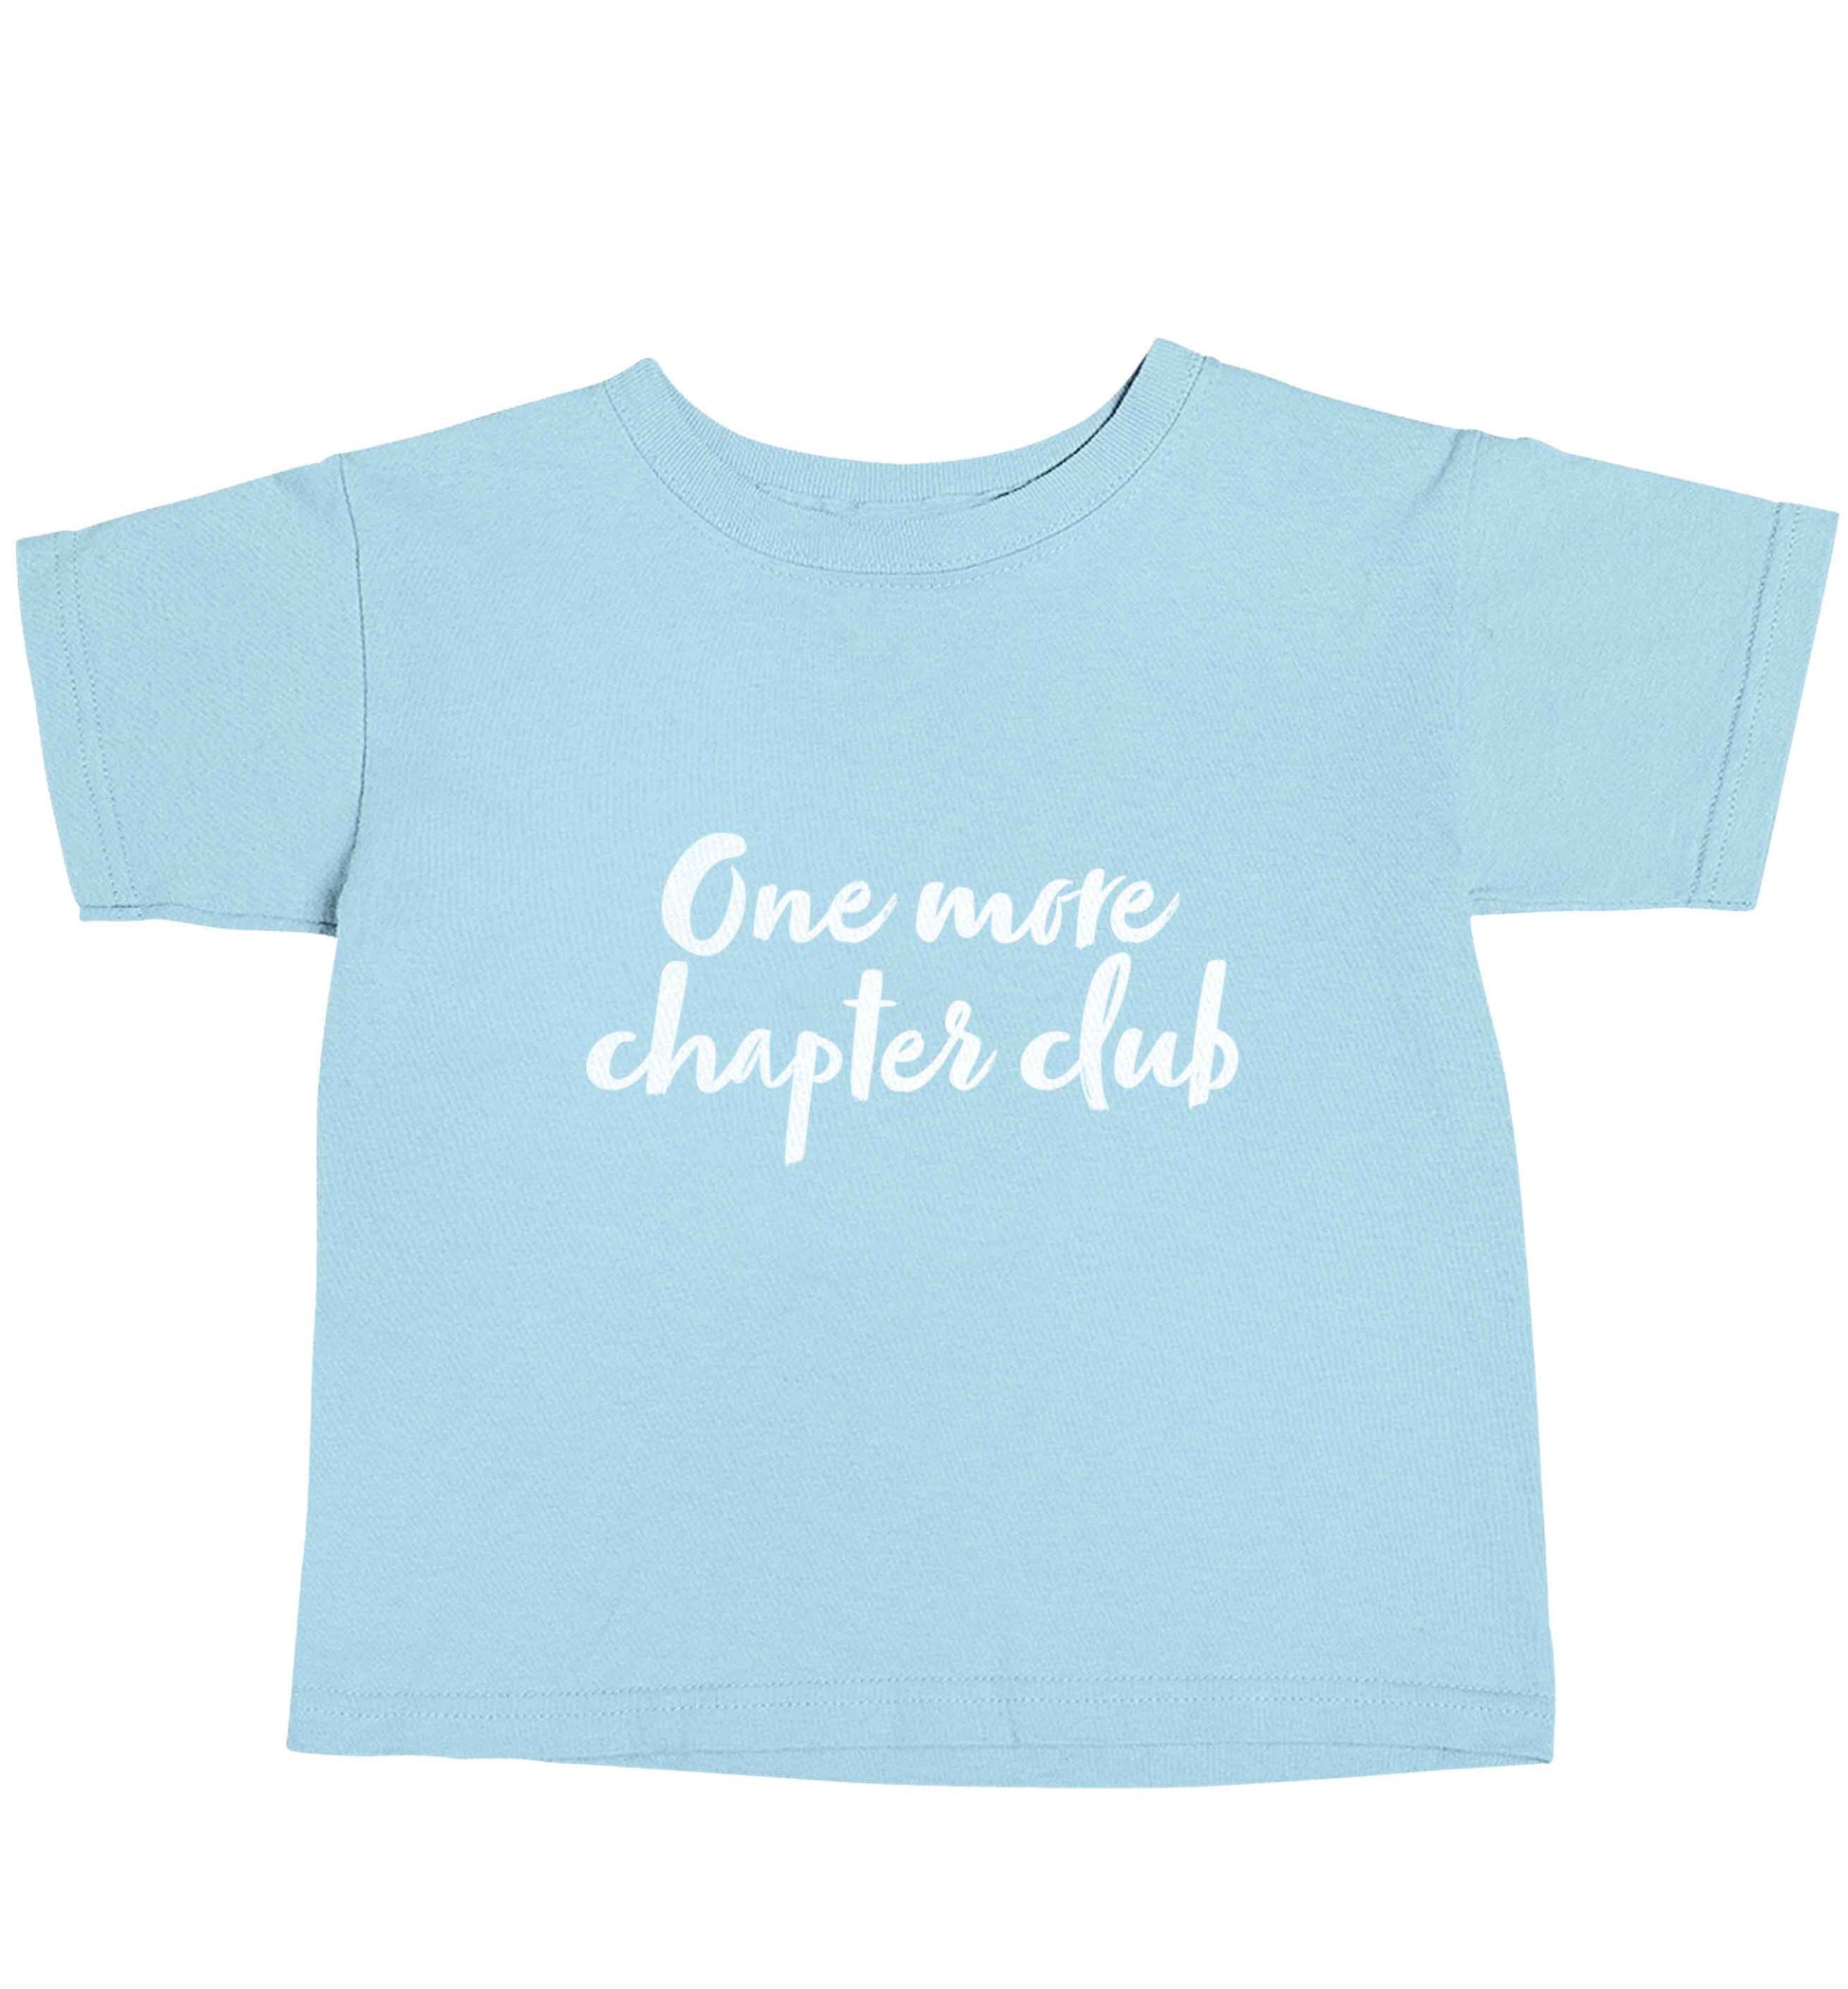 One more chapter club Kit light blue baby toddler Tshirt 2 Years